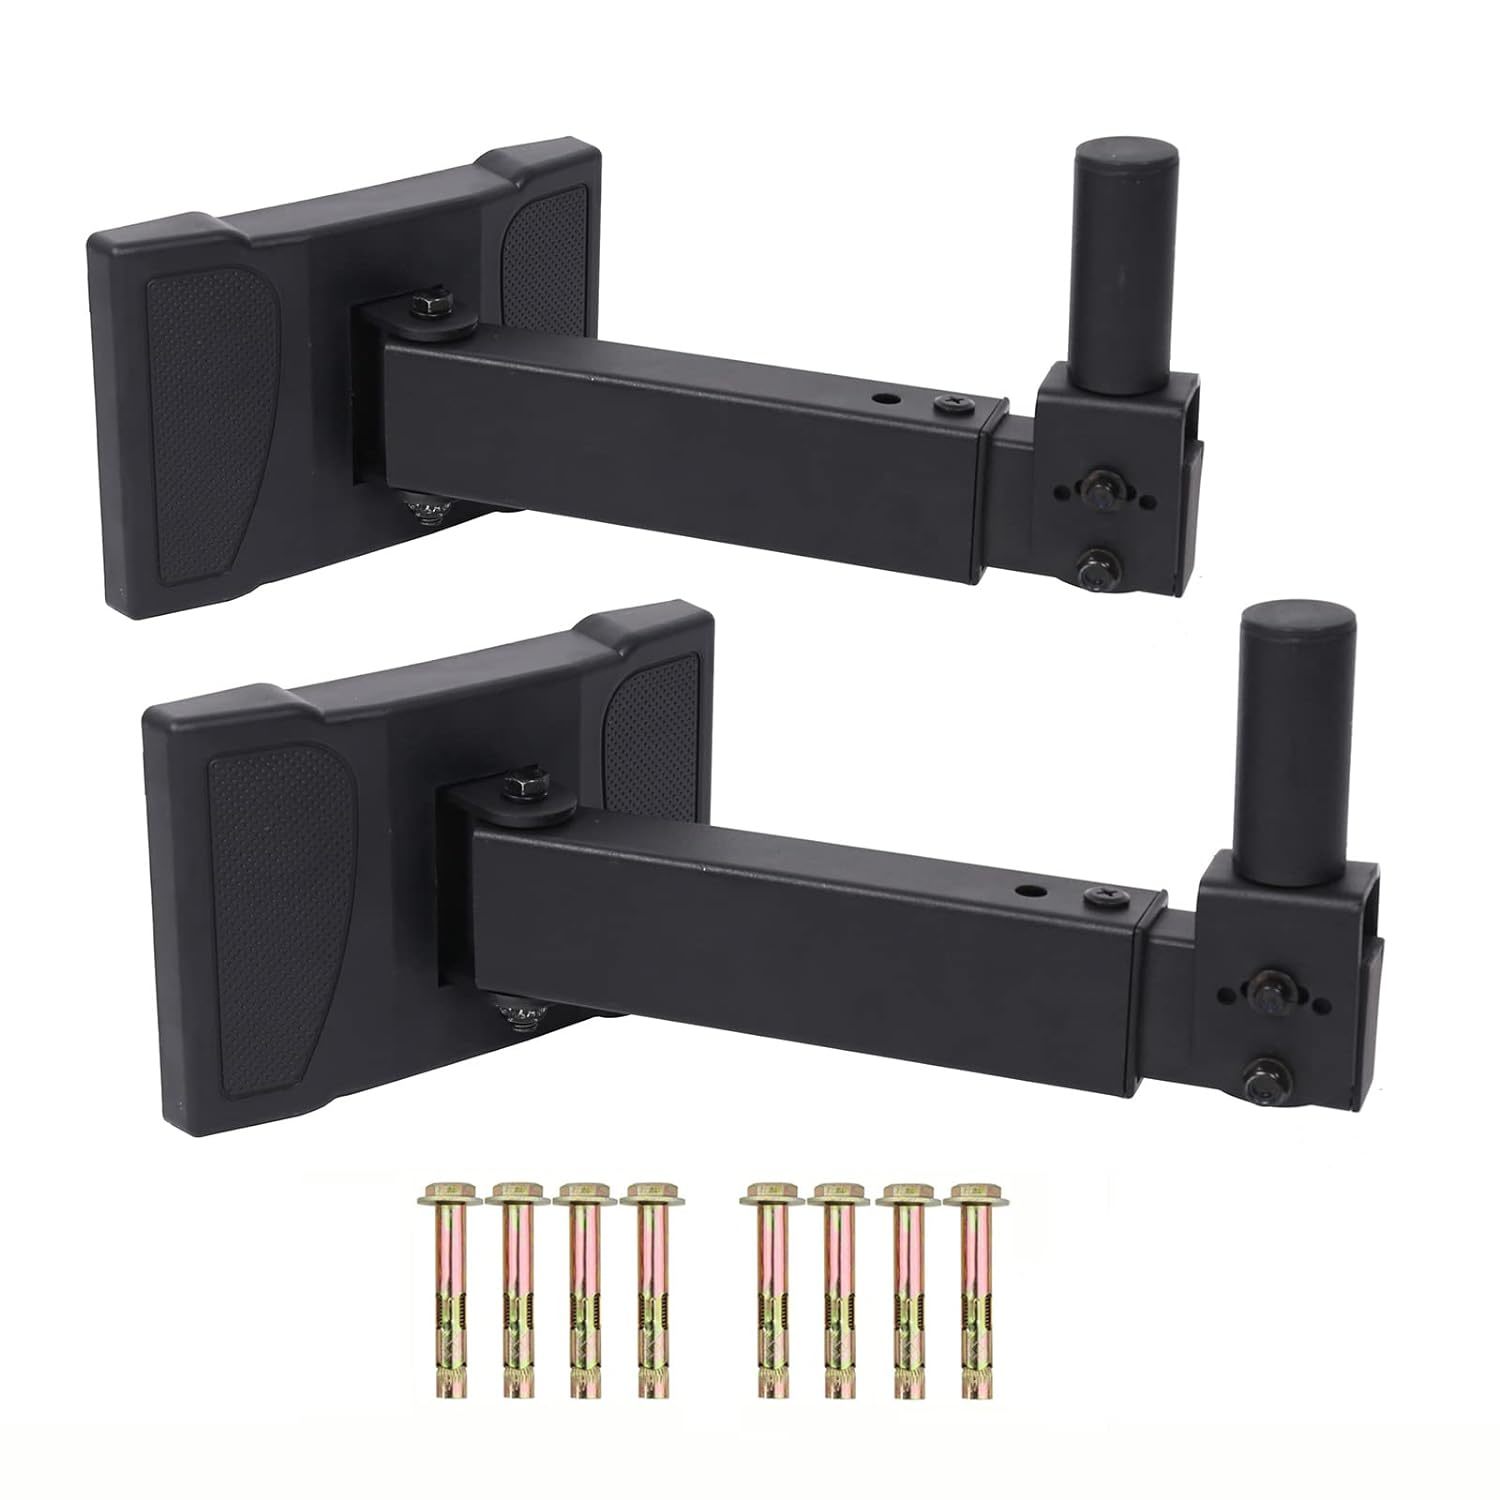 Primary image for Heavy Duty Speaker Wall Mounts,Hold Up To 100Lbs, Speaker Wall Mount Bracket Des